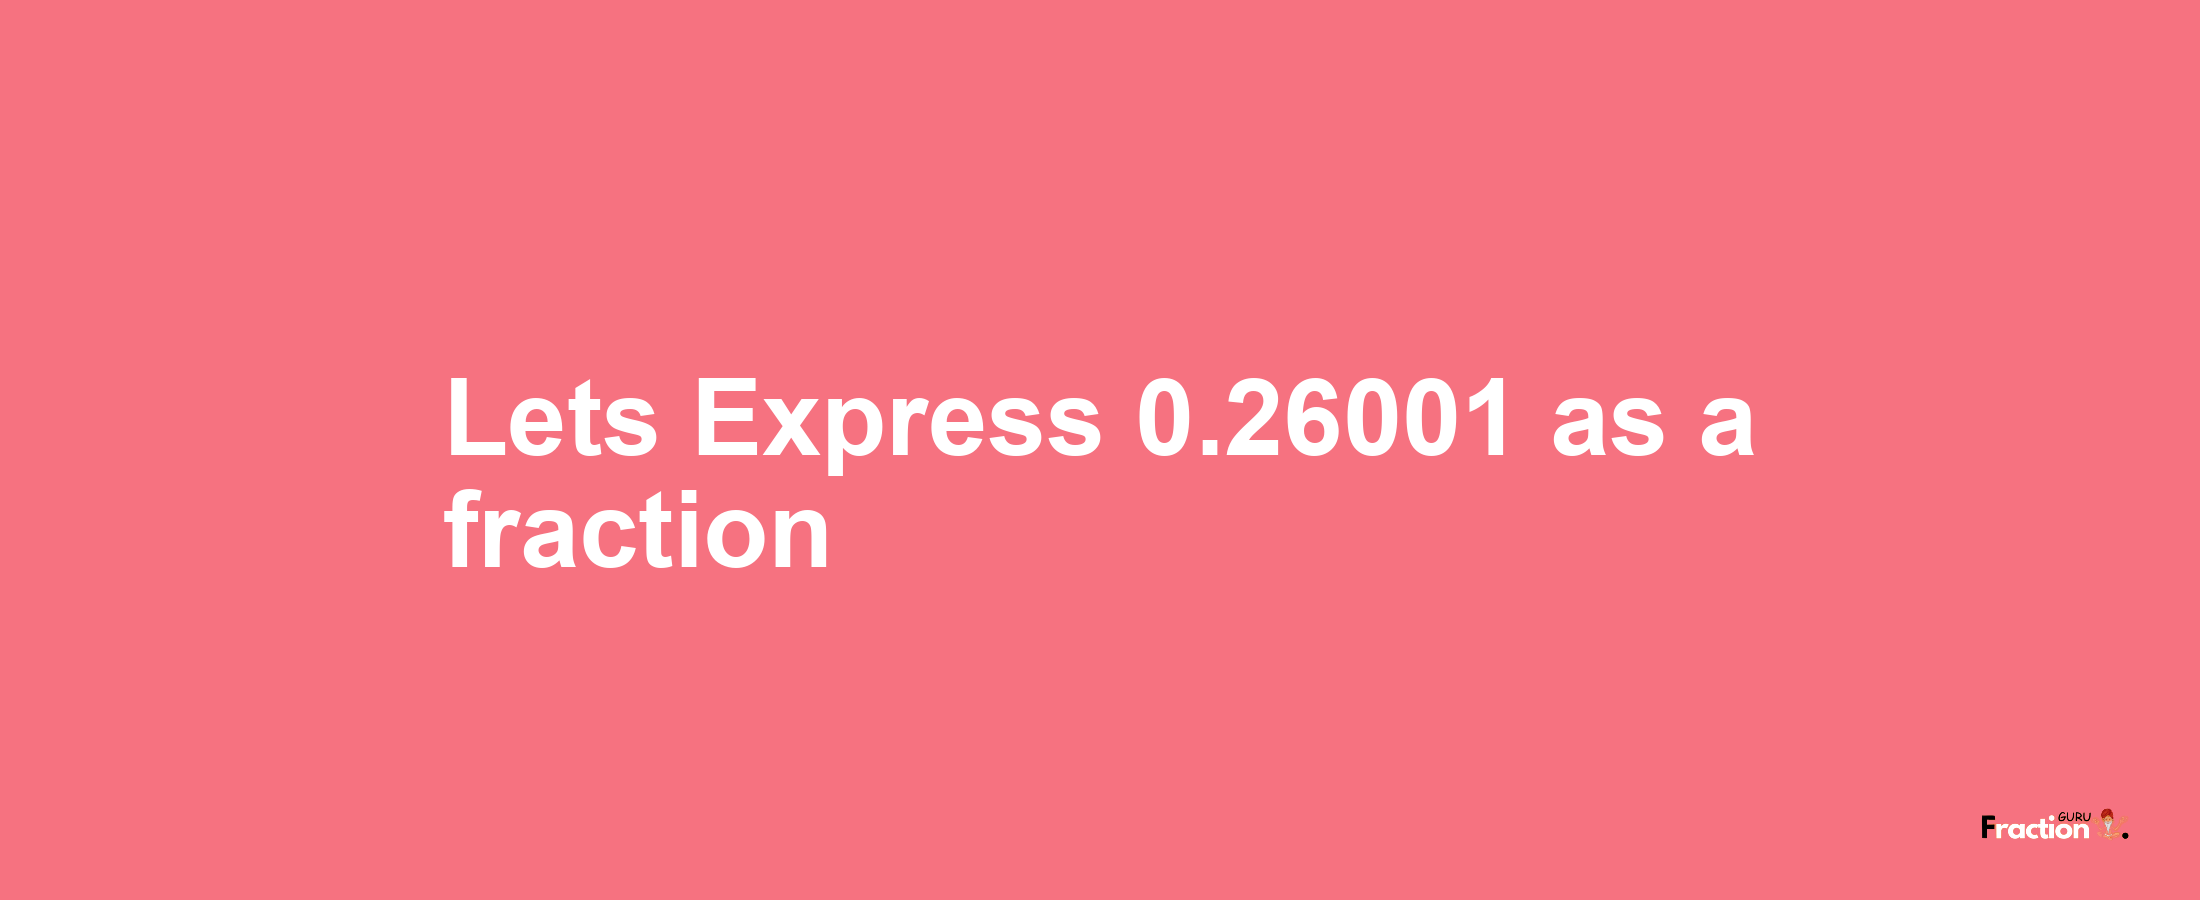 Lets Express 0.26001 as afraction